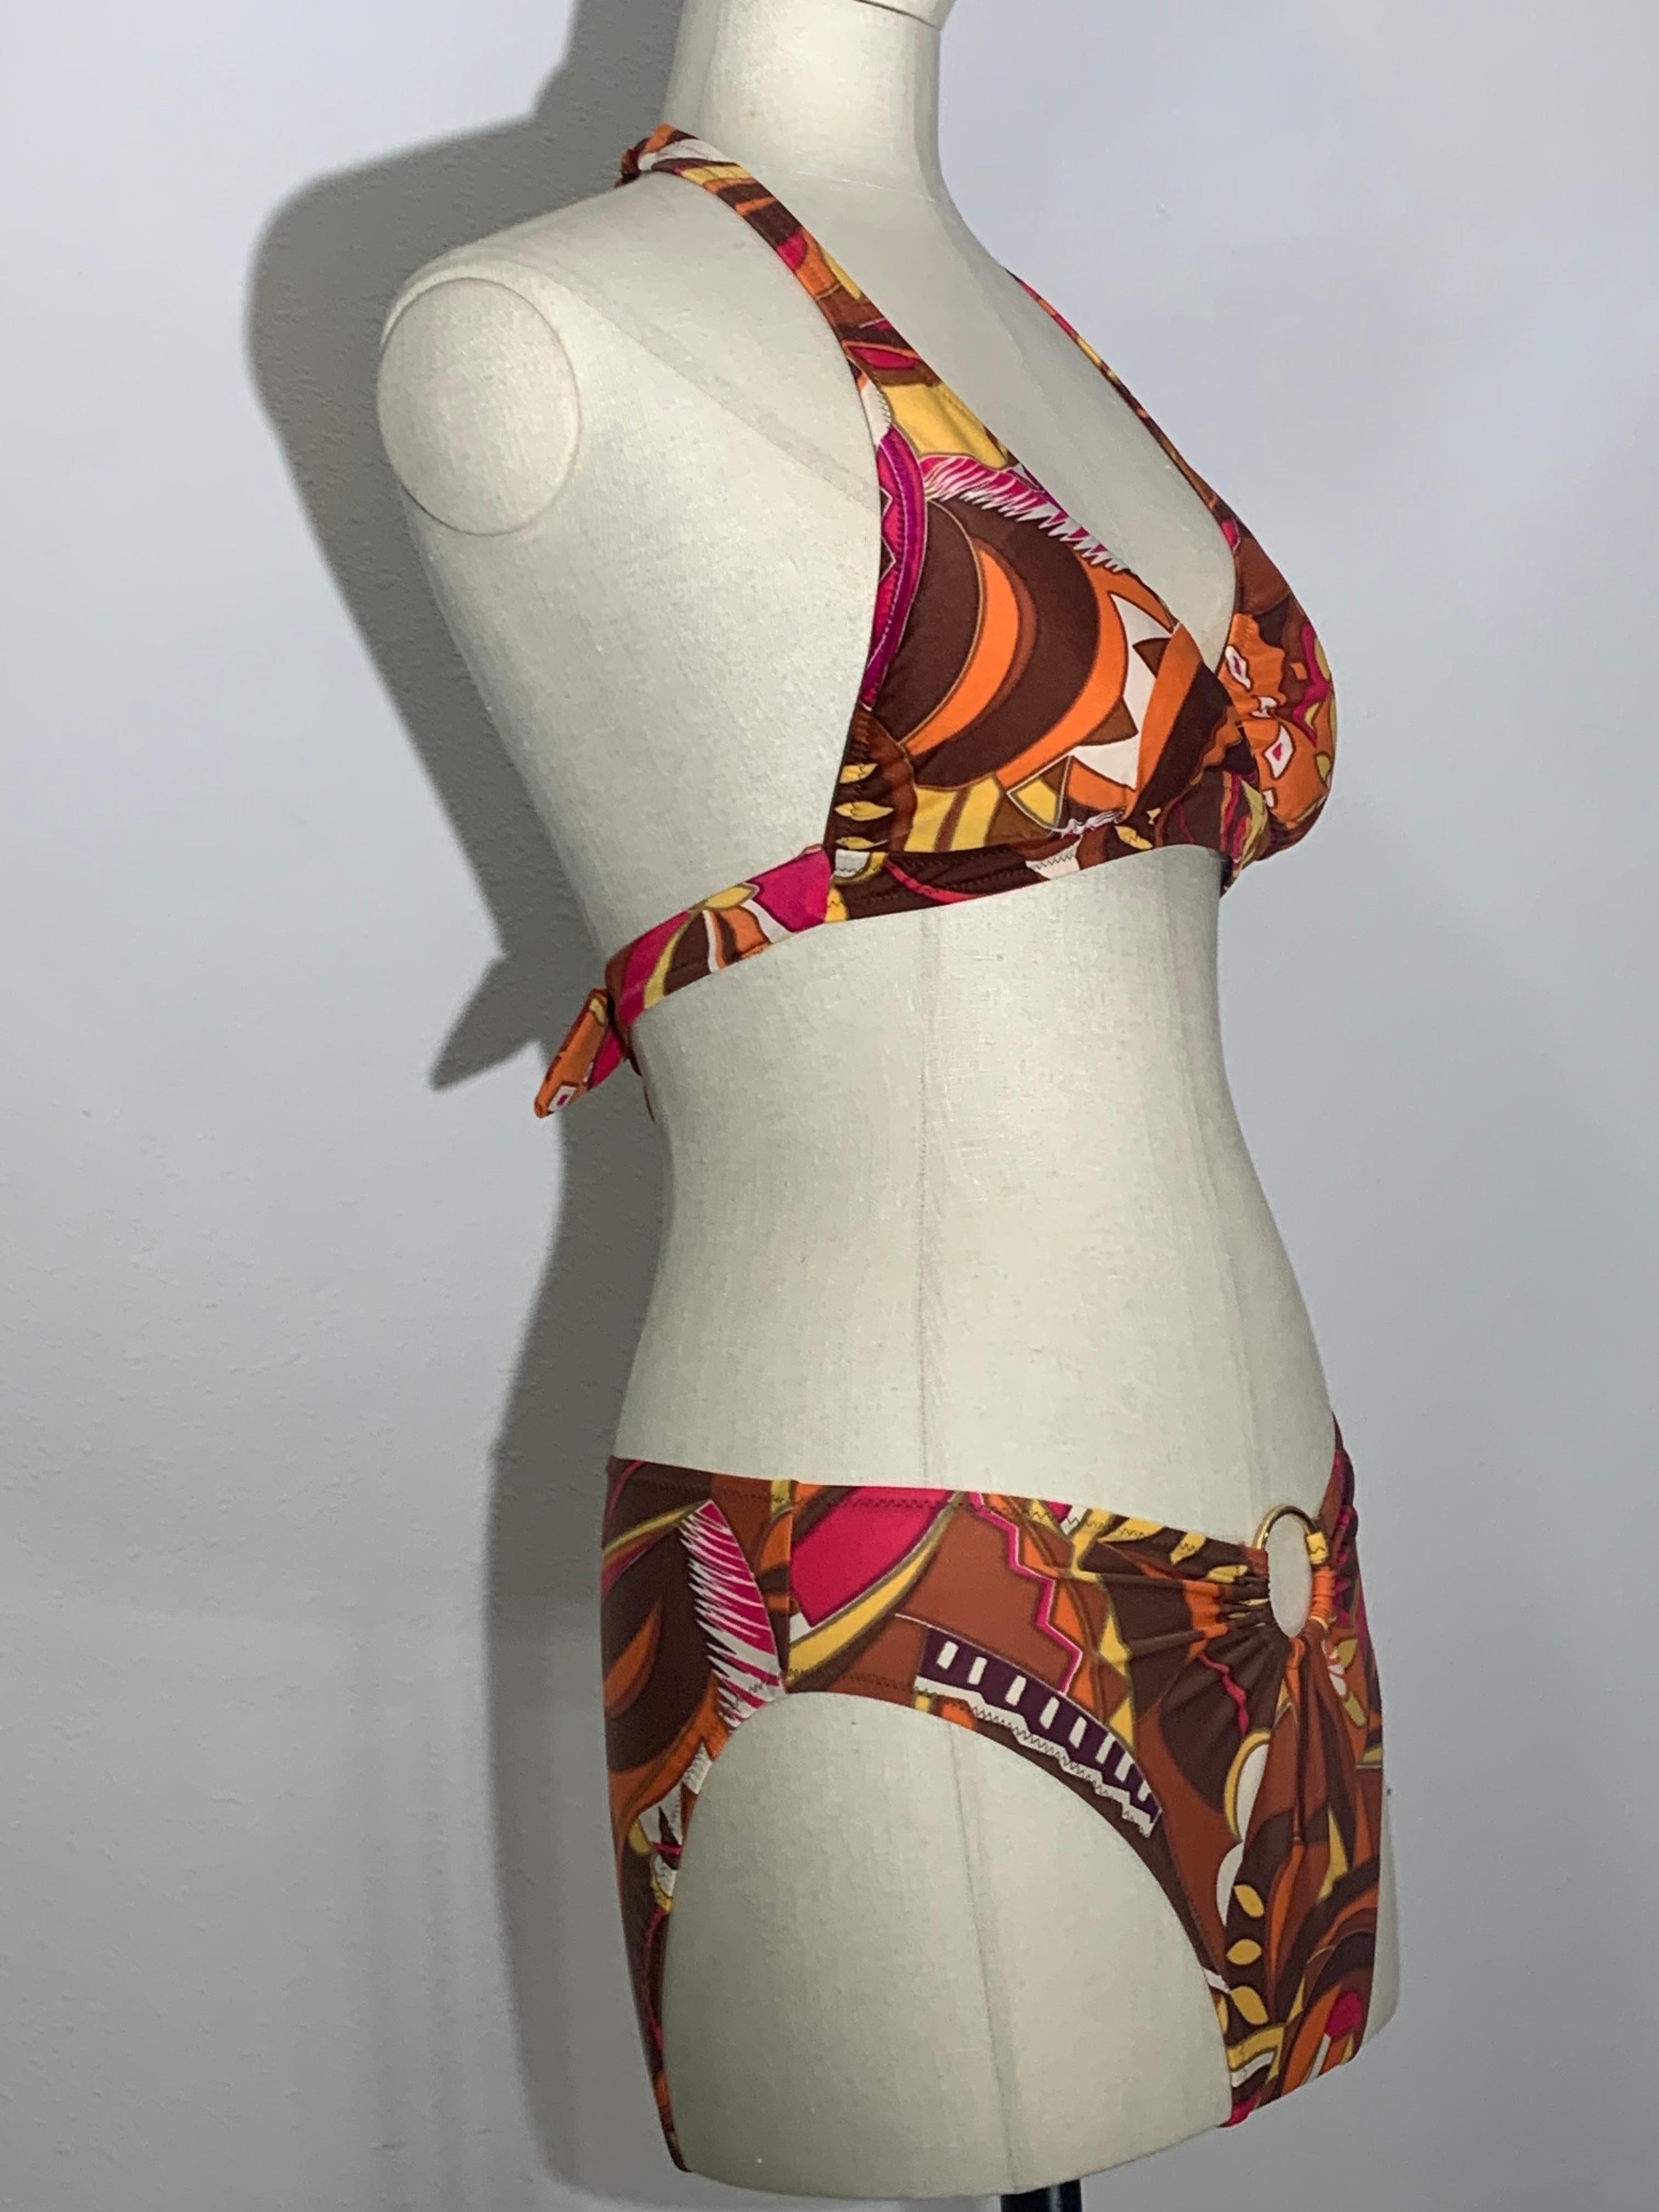 1970s Gottex Stylized Floral 2-Piece Bikini Swimsuit in Brown Copper and Orange For Sale 4